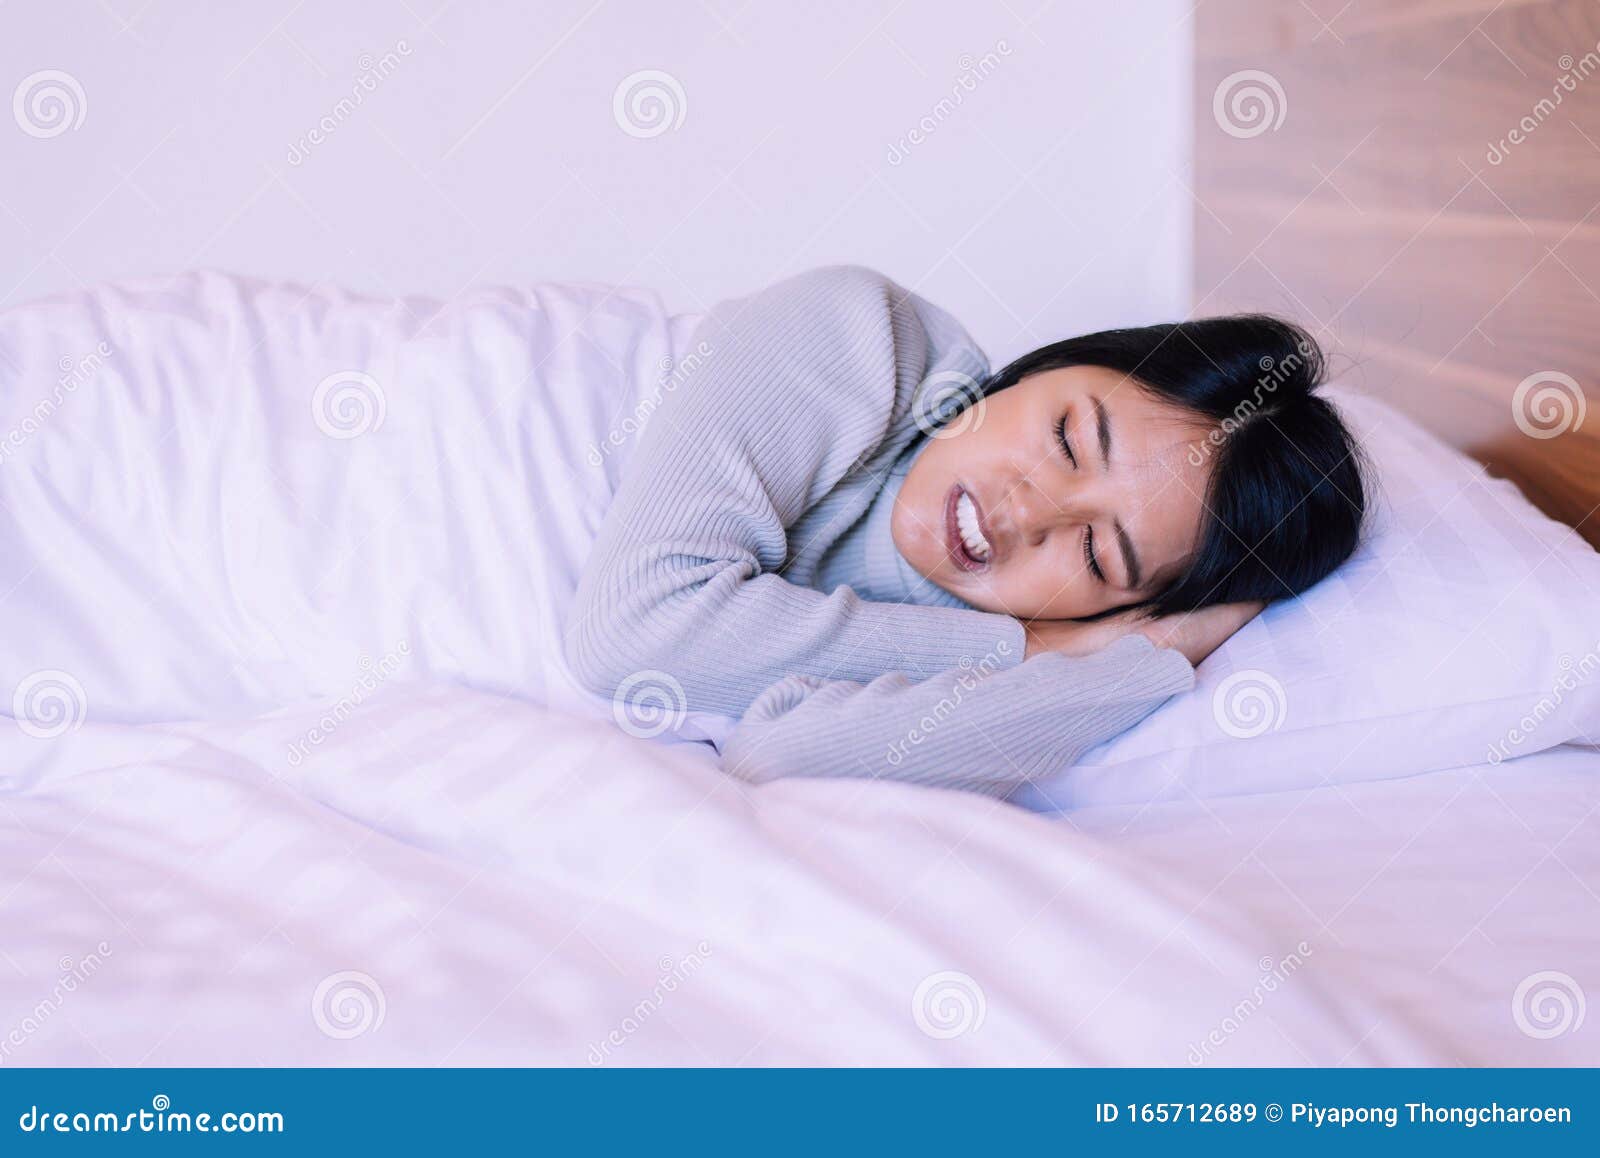 beautiful asian woman sleeping on bed and grinding teeth,female tiredness and stress